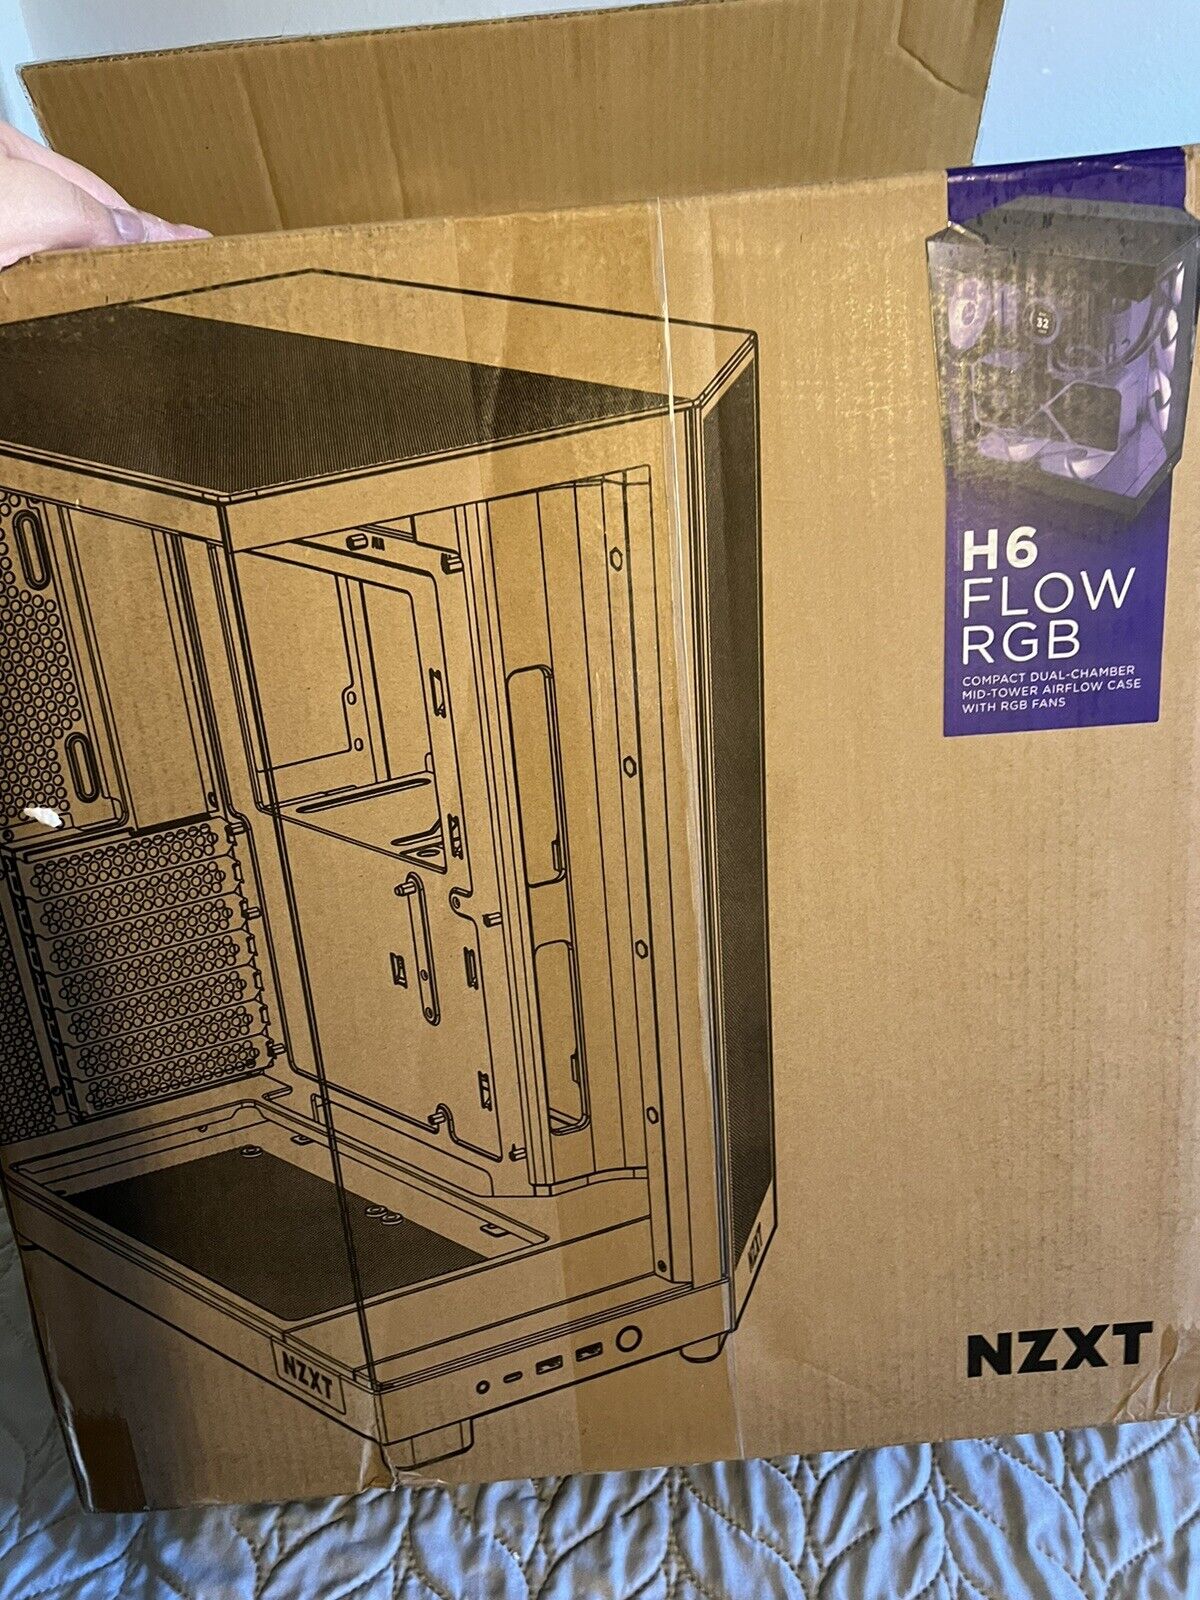 NZXT - H6 Flow ATX Mid-Tower Case with Dual Chamber - Black No Fans